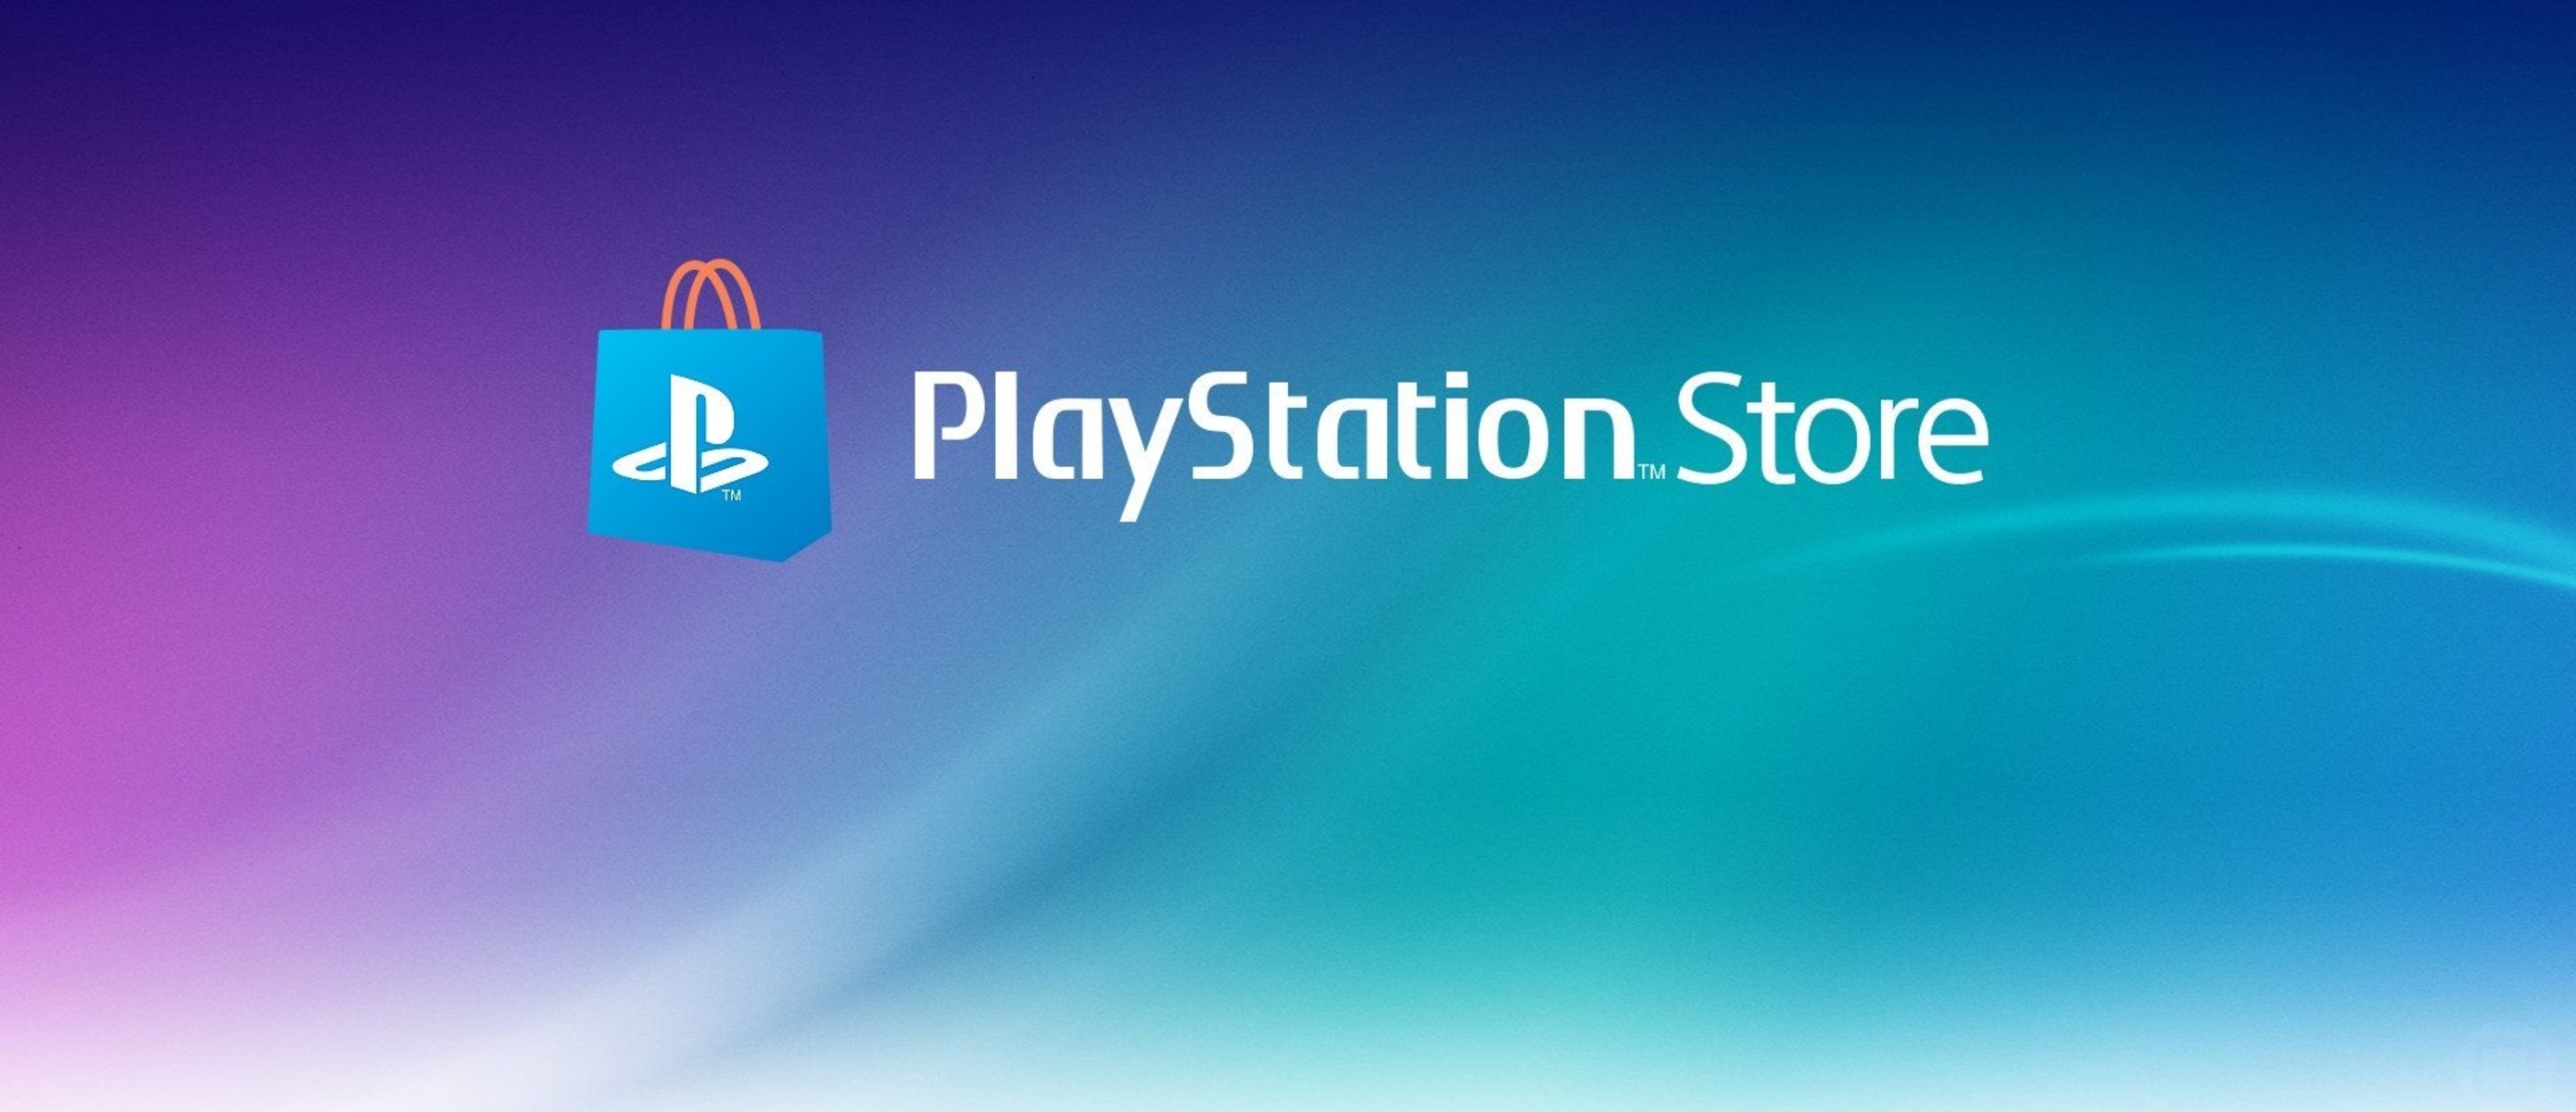 Пс стор 5. PLAYSTATION Store. PS Sony PLAYSTATION Store. PS Store логотип. Sony PLAYSTATION 4 Store.